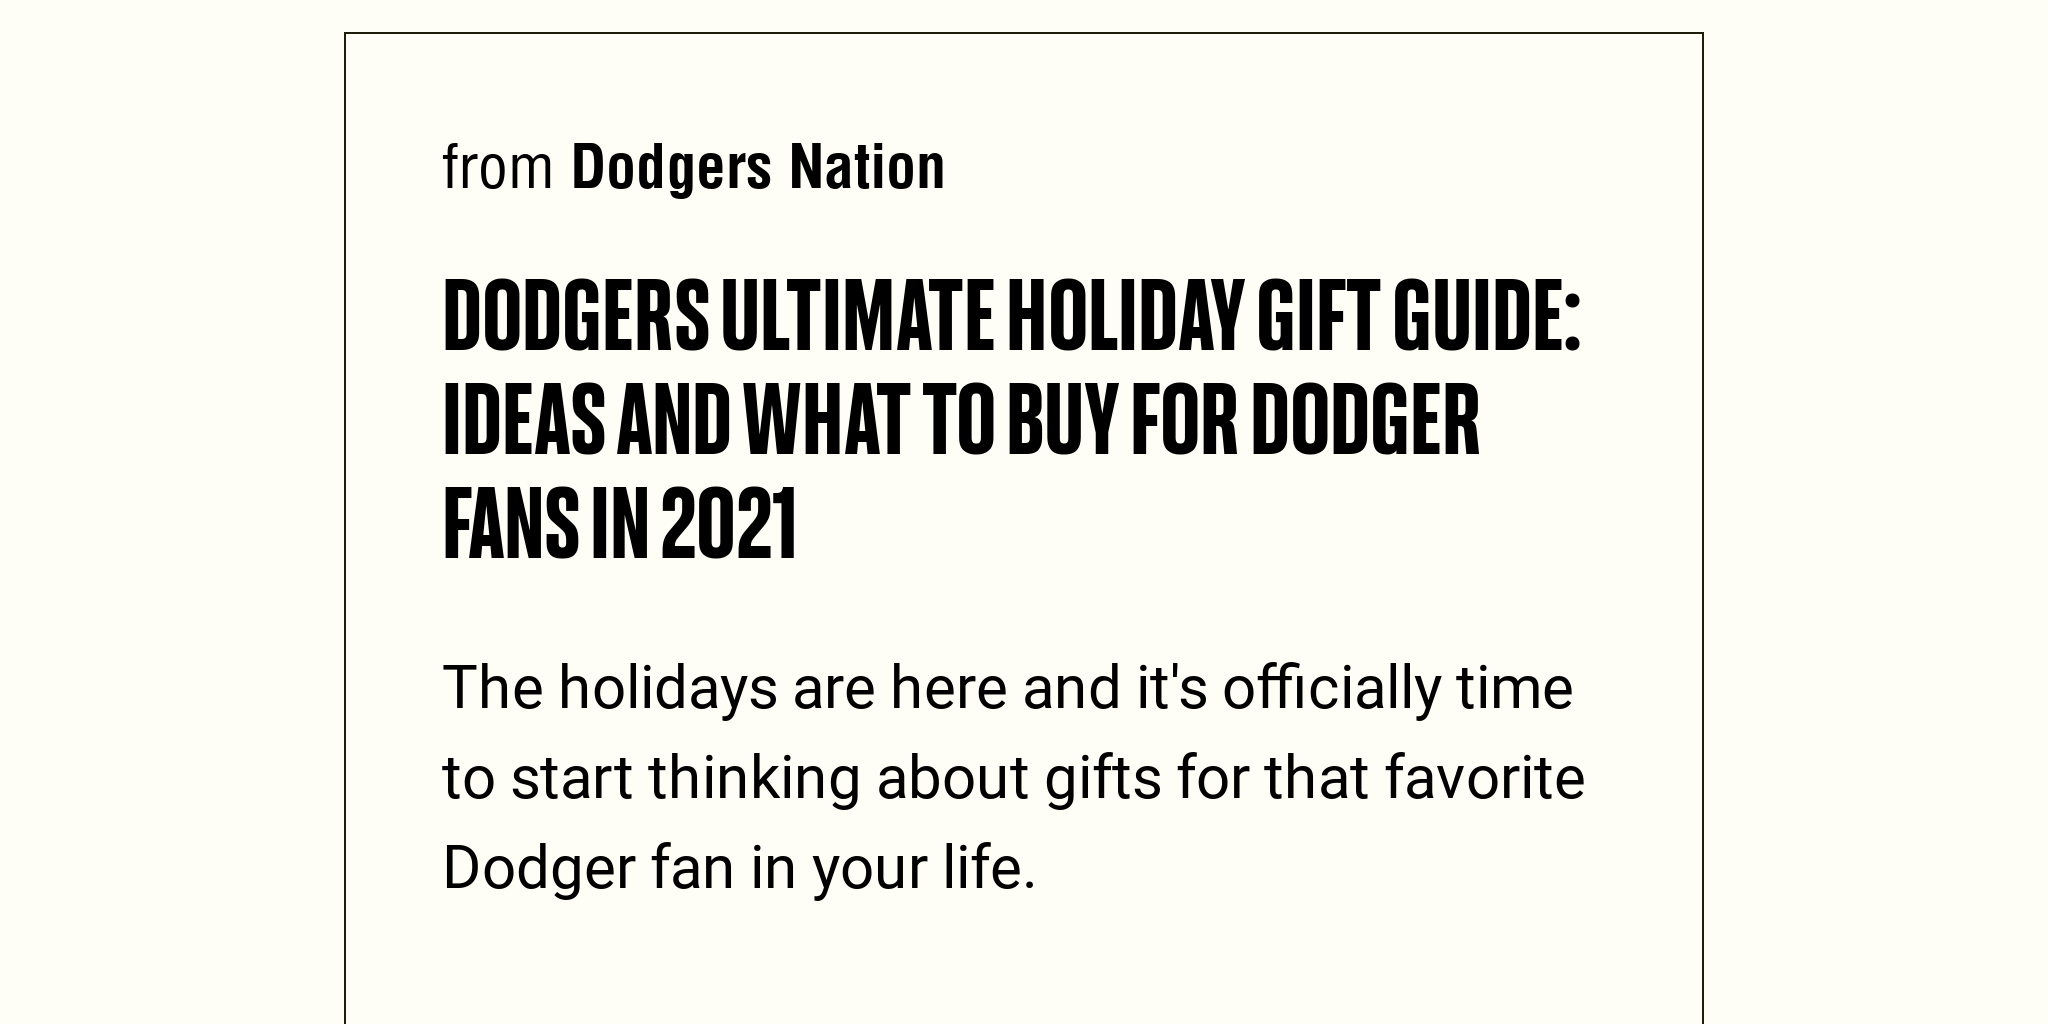 Dodgers Ultimate Holiday Gift Guide: Ideas and What to Buy for Dodger